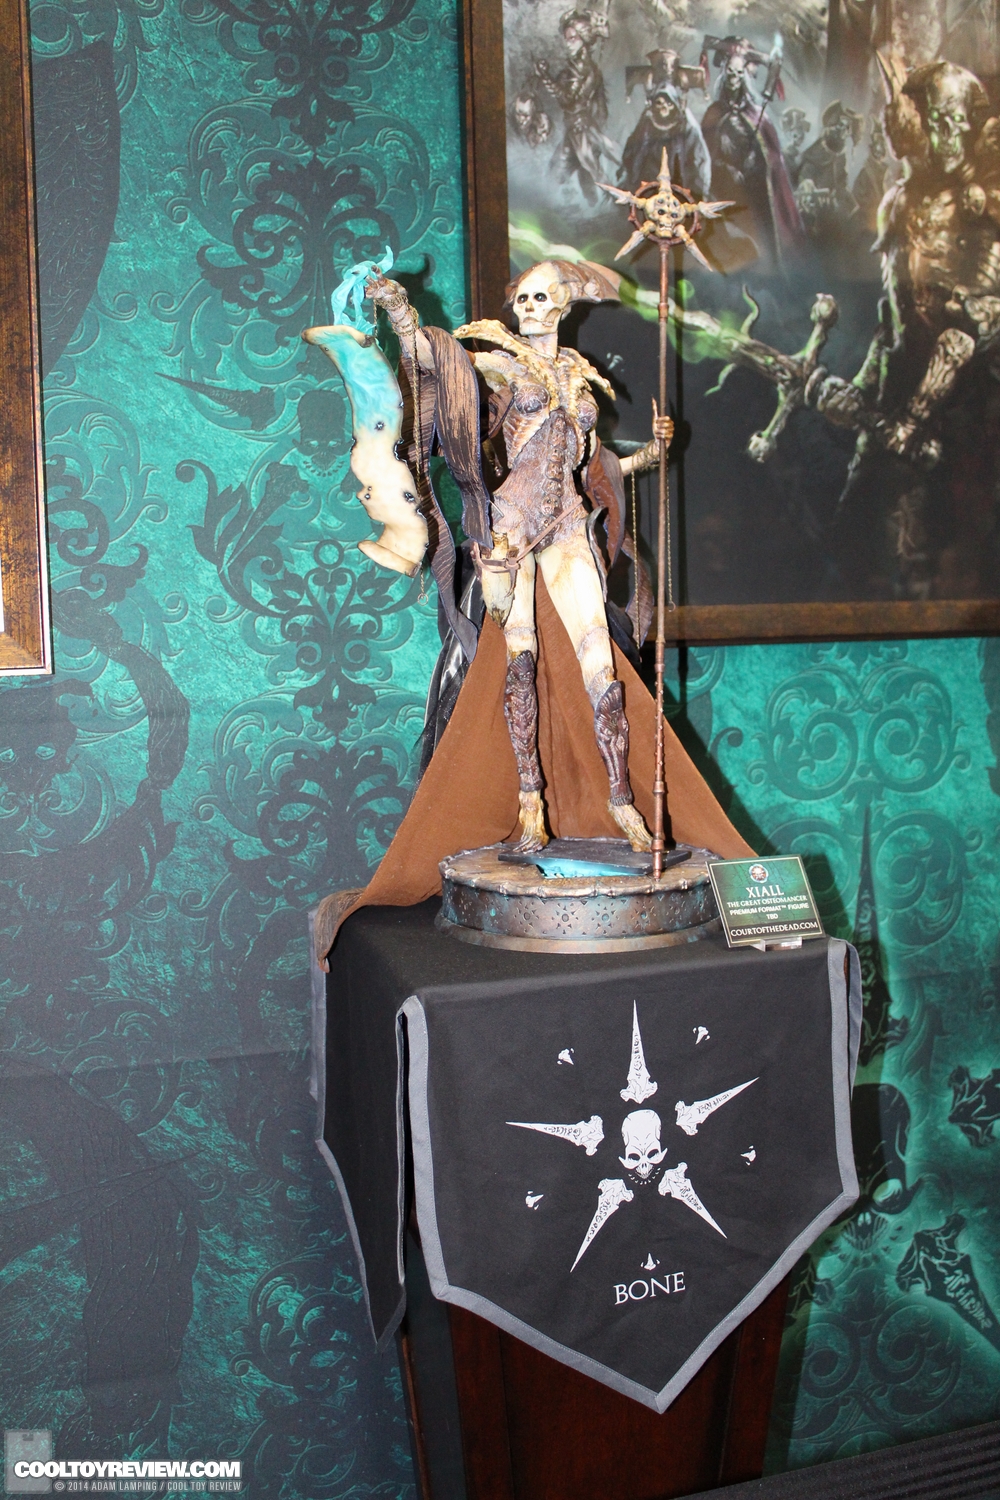 san-diego-comic-con-2014-sideshow-collectibles-court-of-the-dead-006.JPG